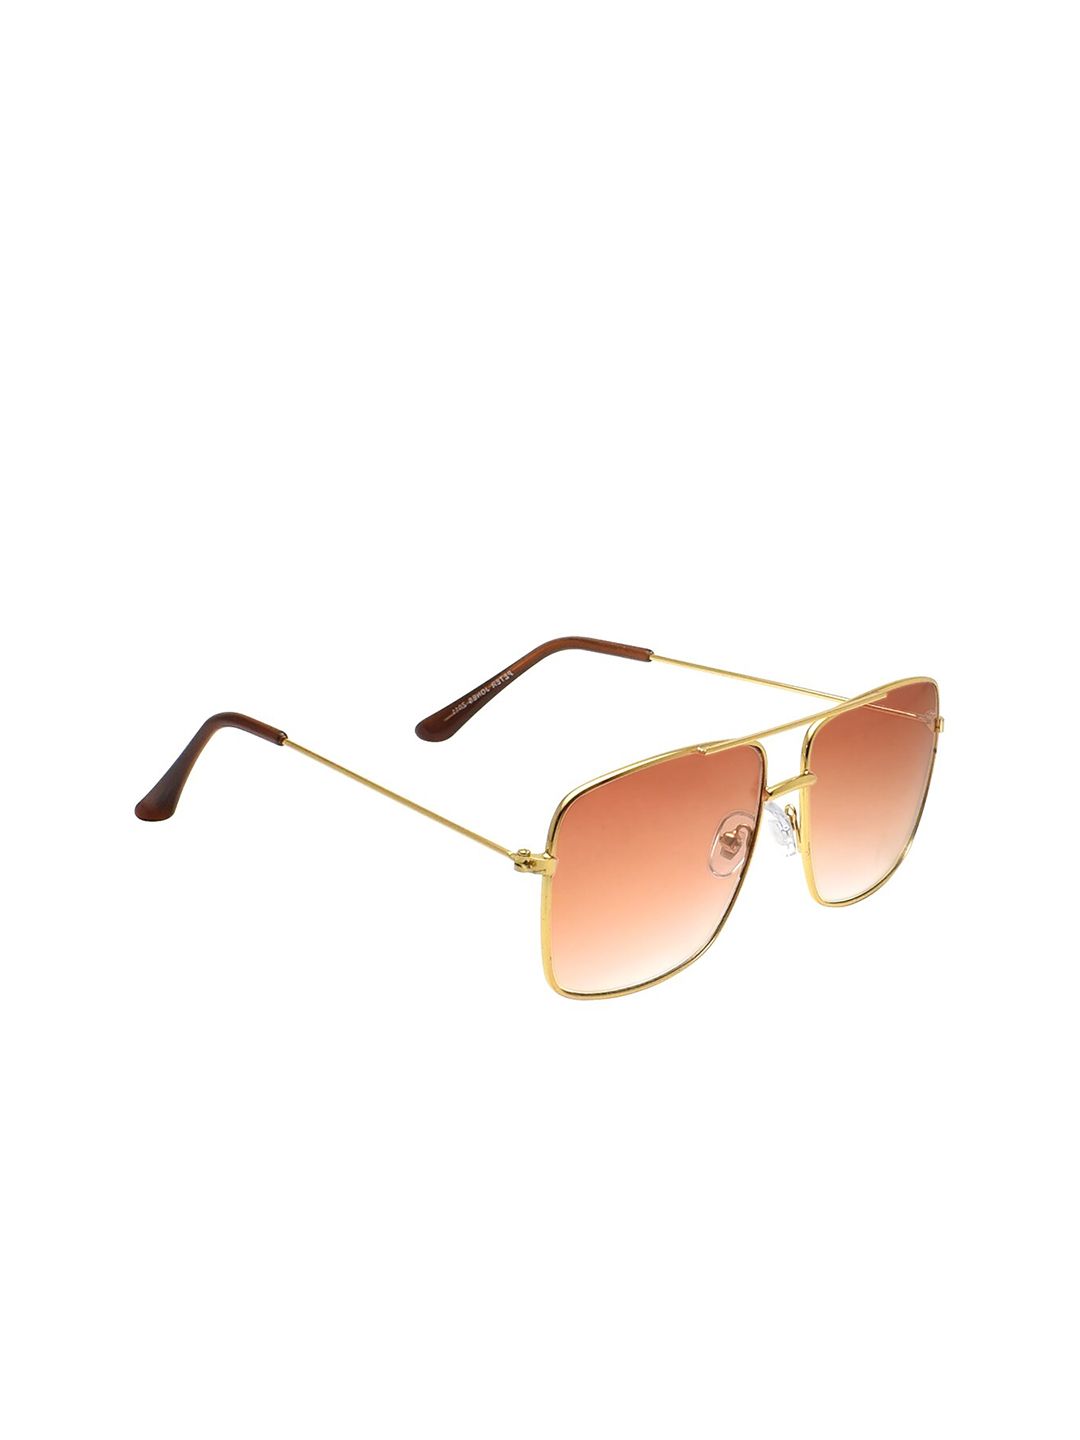 Peter Jones Eyewear Unisex Brown Lens Rectangle Sunglasses with UV Protected Lens G-005BR Price in India